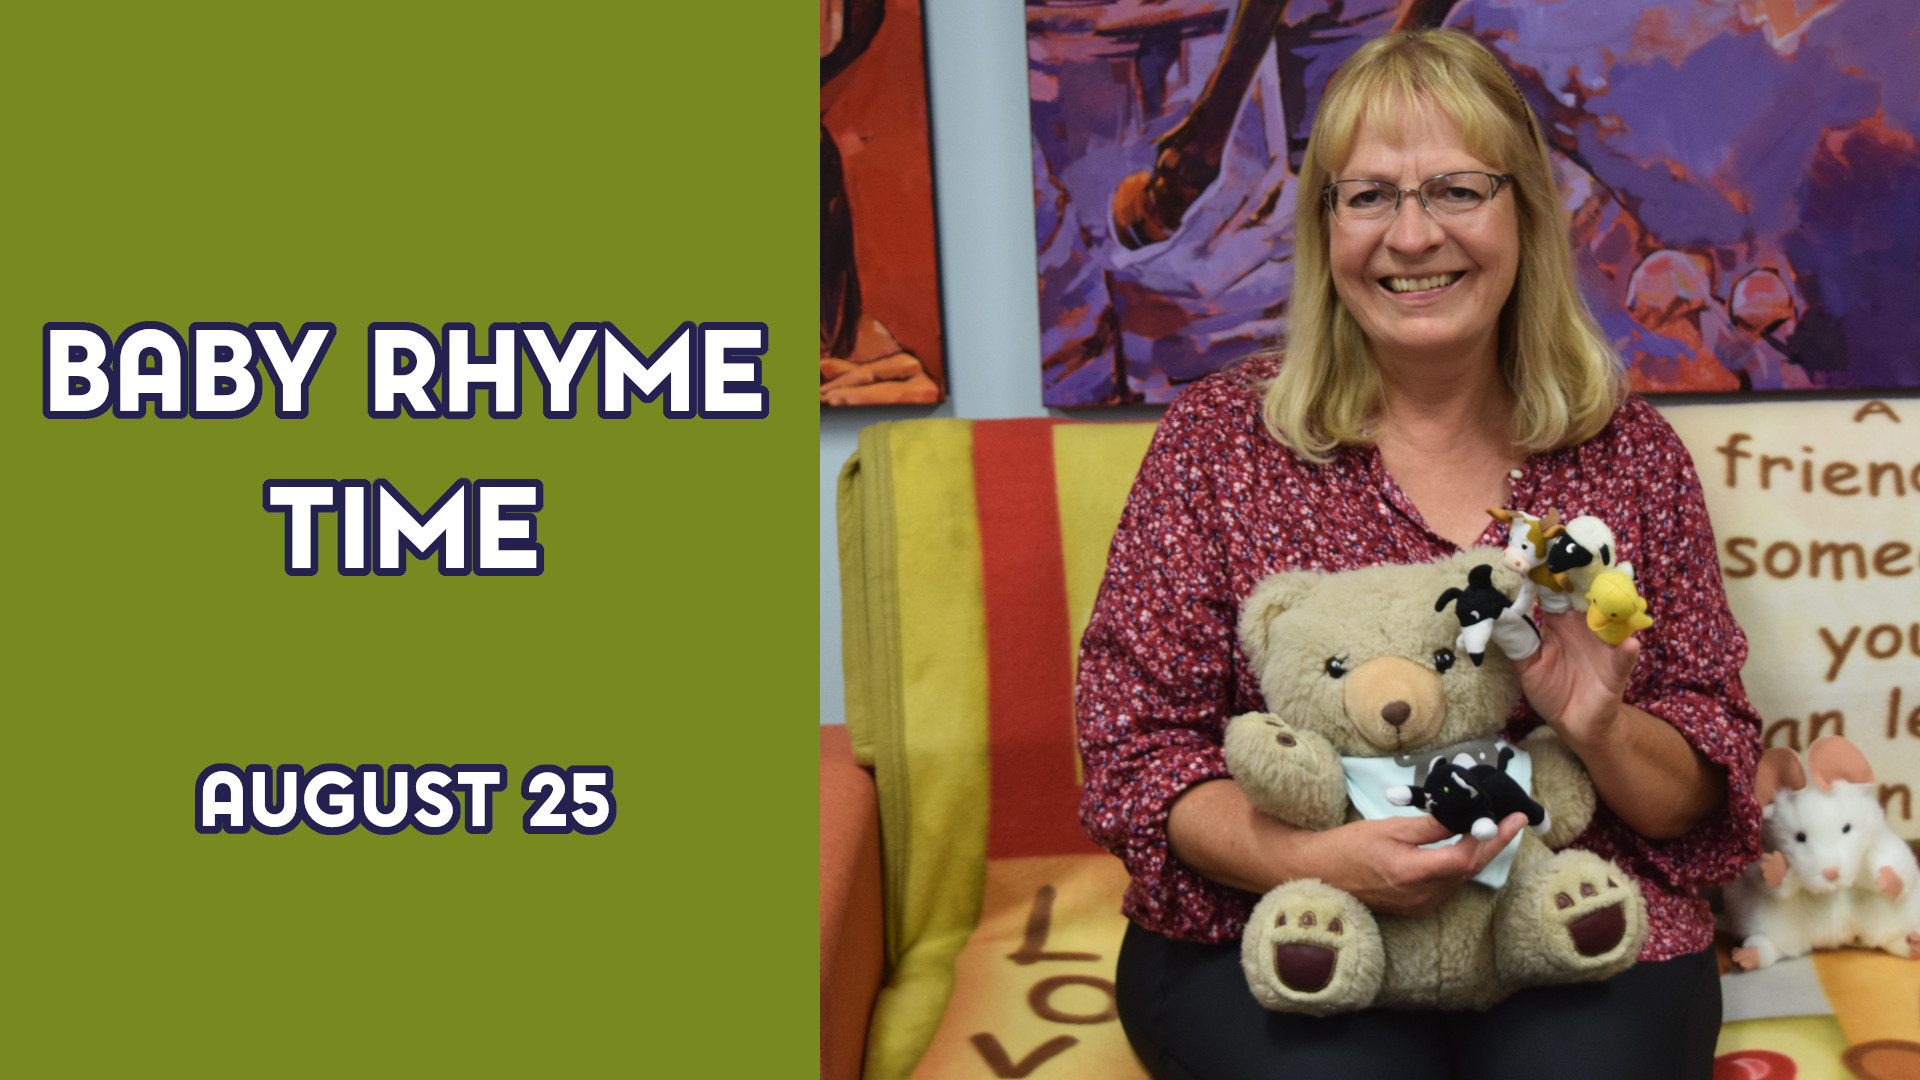 A woman holds stuffed animals next to the text "Baby Rhyme Time August 25"